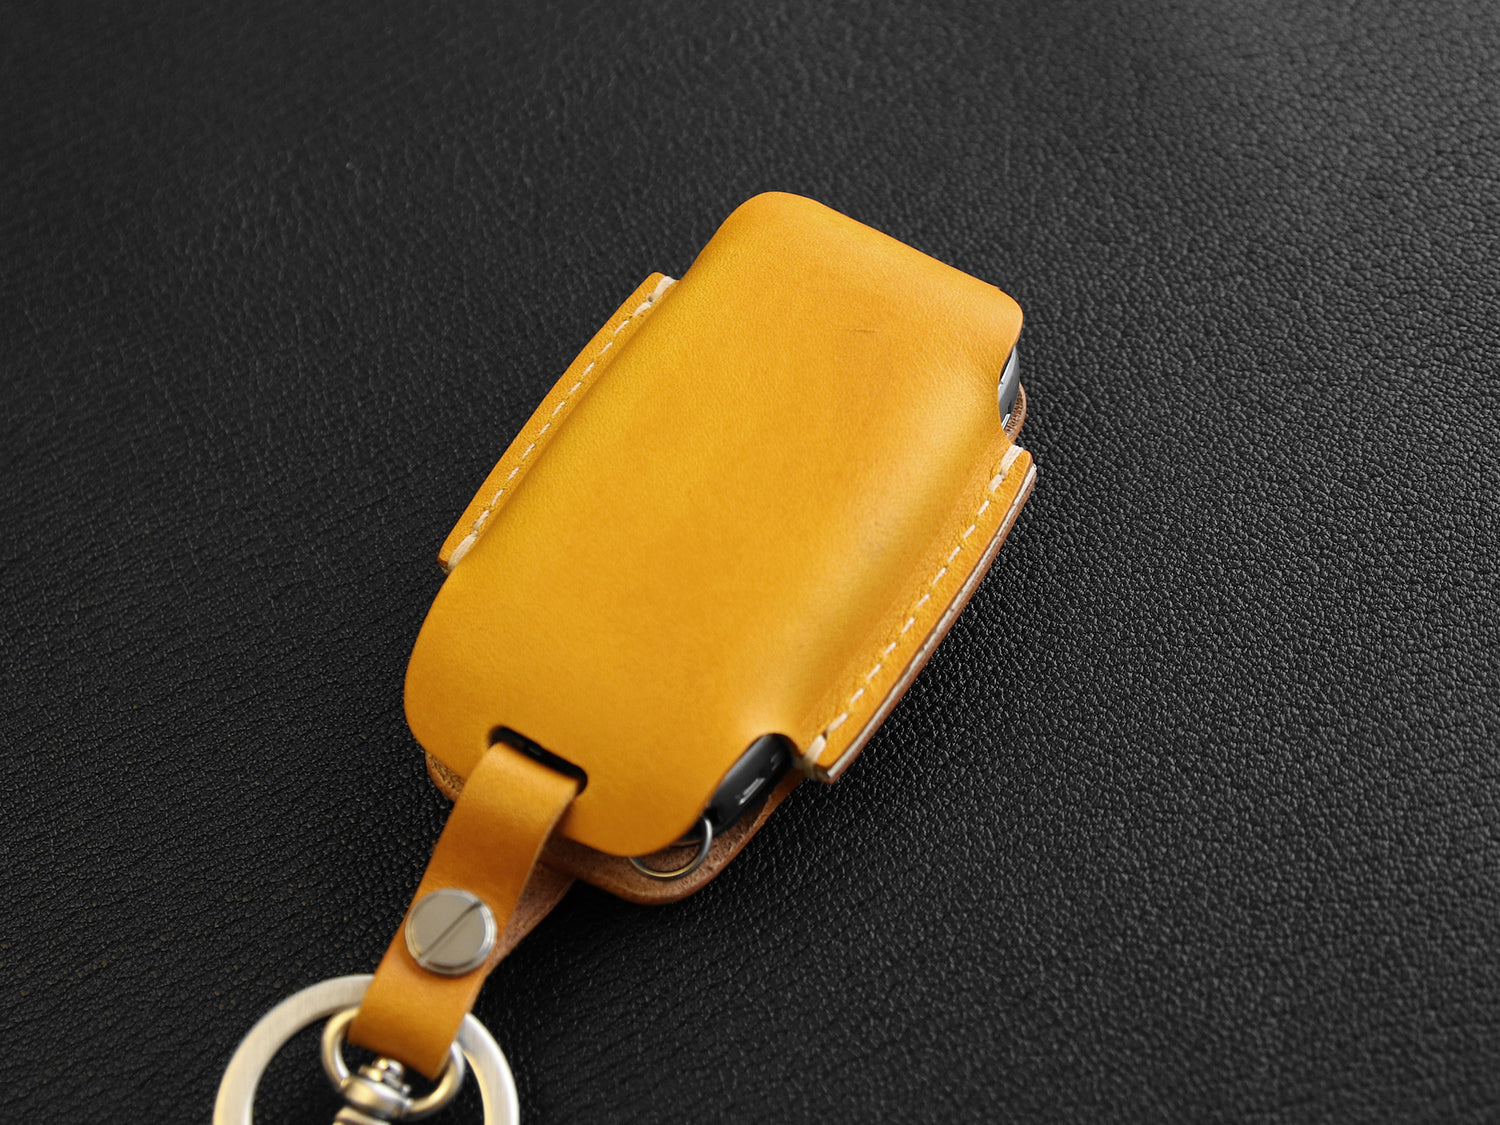 Land Rover Series [3] Leather Key Fob Cover - Range Rover Sport, Discovery 4 - Italian Veg-Tanned Leather